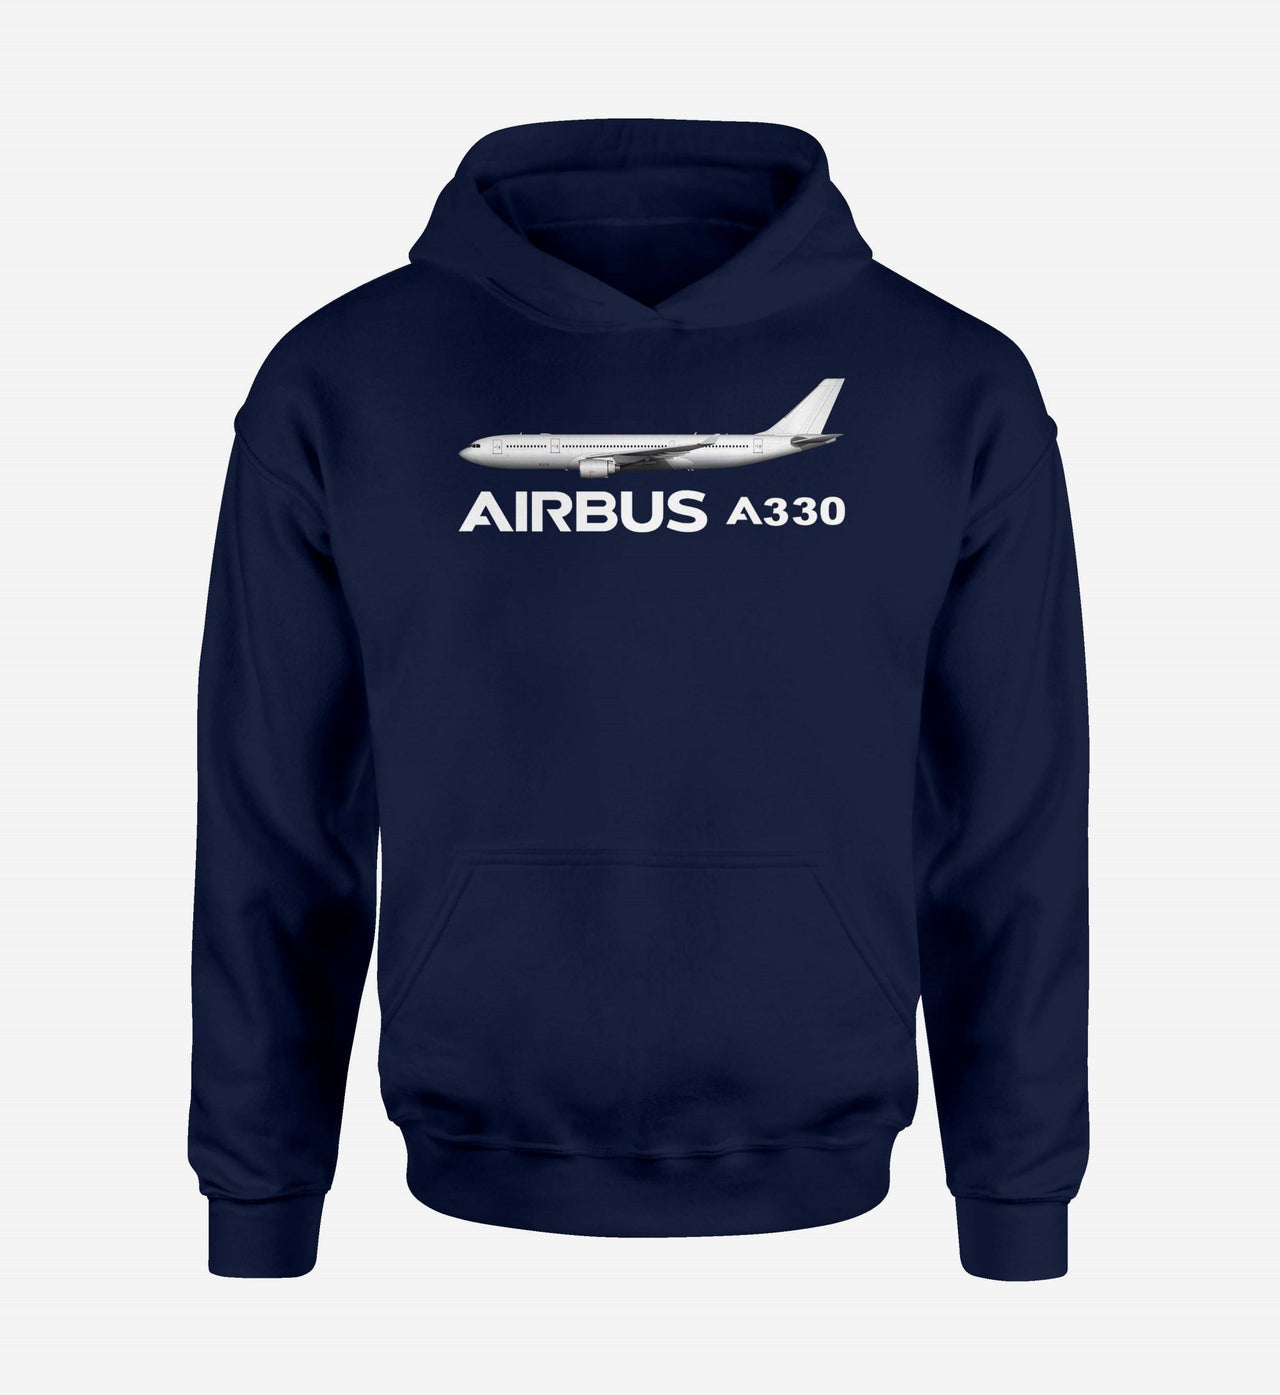 The Airbus A330 Designed Hoodies